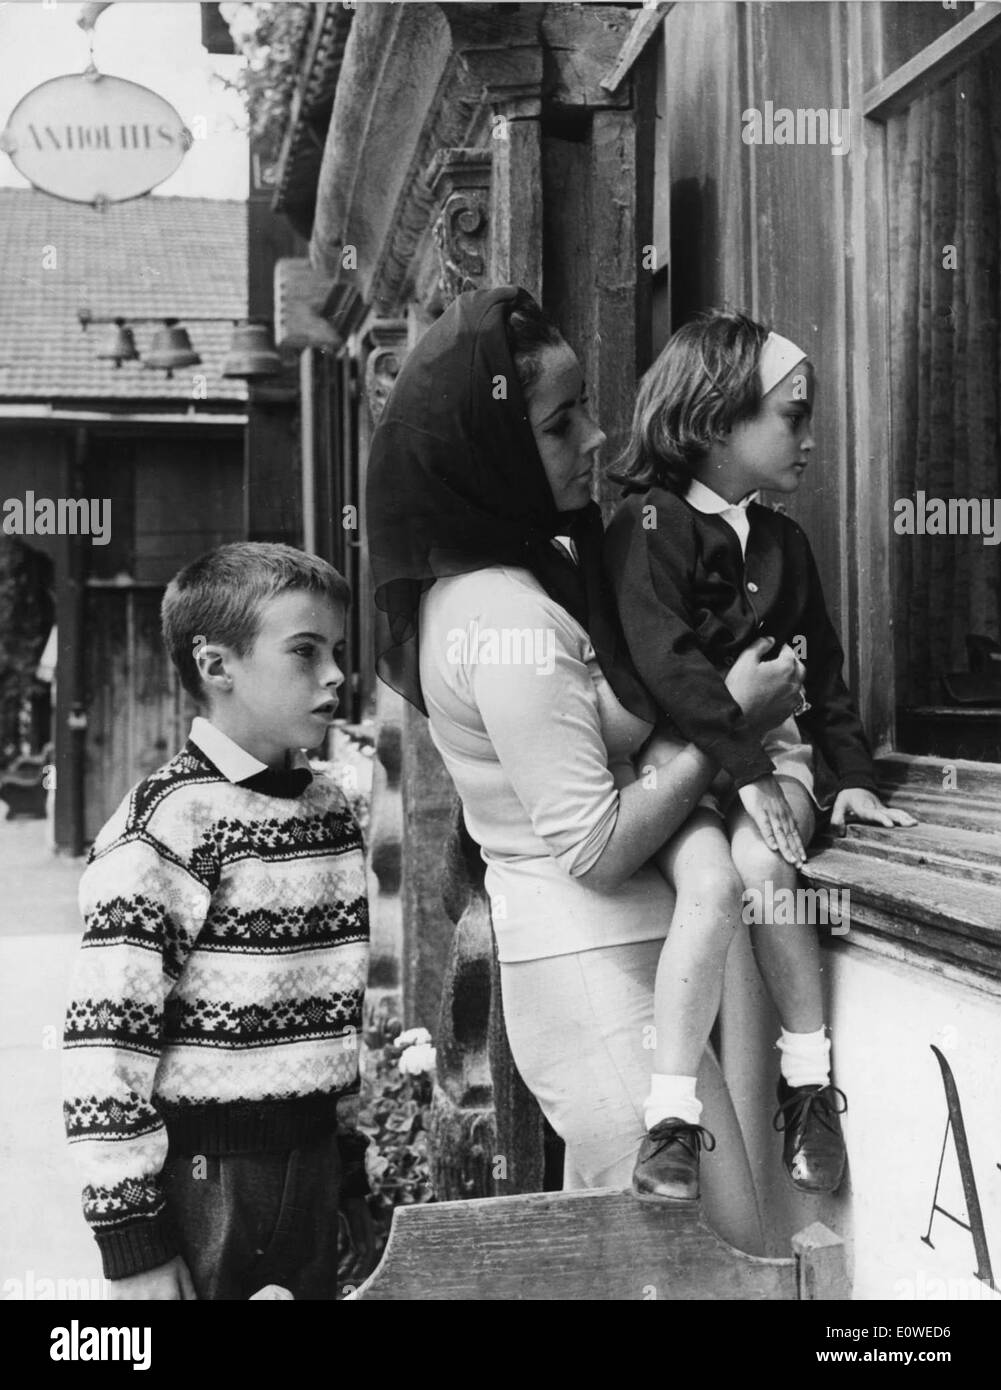 July 20, 1962 - Rome, Italy - Academy Award winning screen legend, ELIZABETH 'LIZ' TAYLOR (1932-2011) takes a break from filming the final scenes of 'Cleopatra' to spend some time window shopping with her kids MICHAEL WILDING, JR. and LIZA TODD. Stock Photo